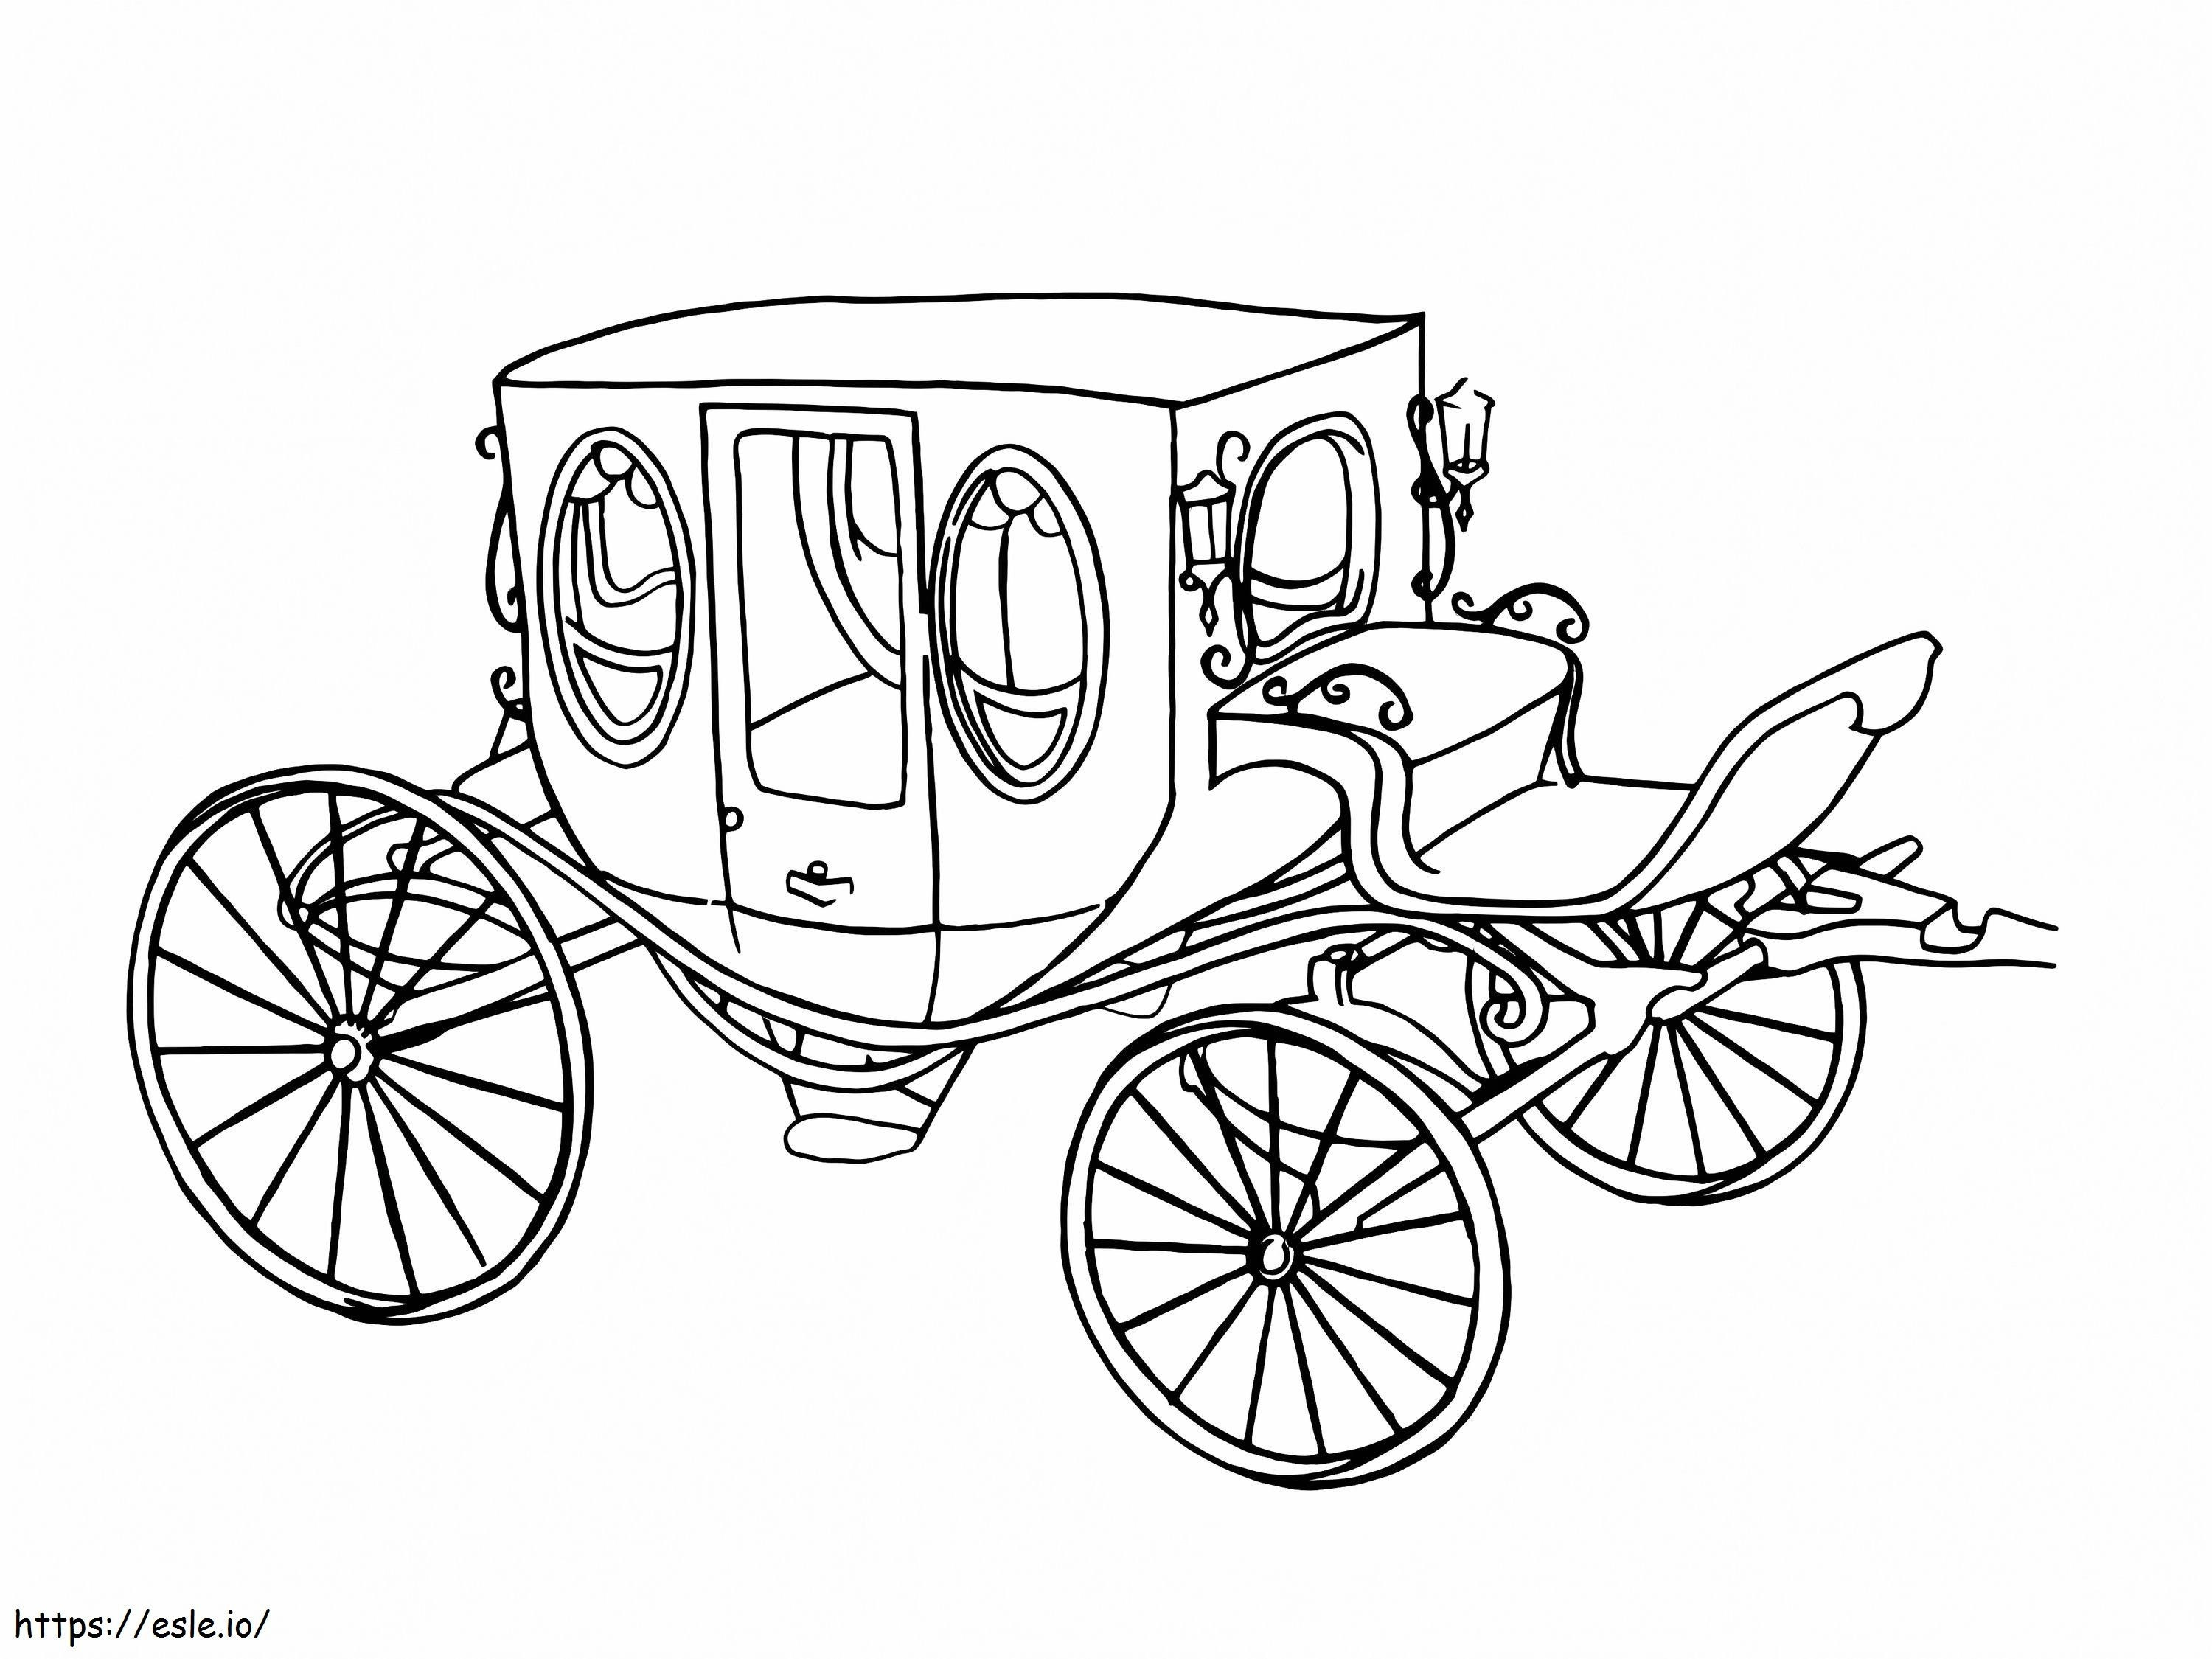 Royal Carriage coloring page